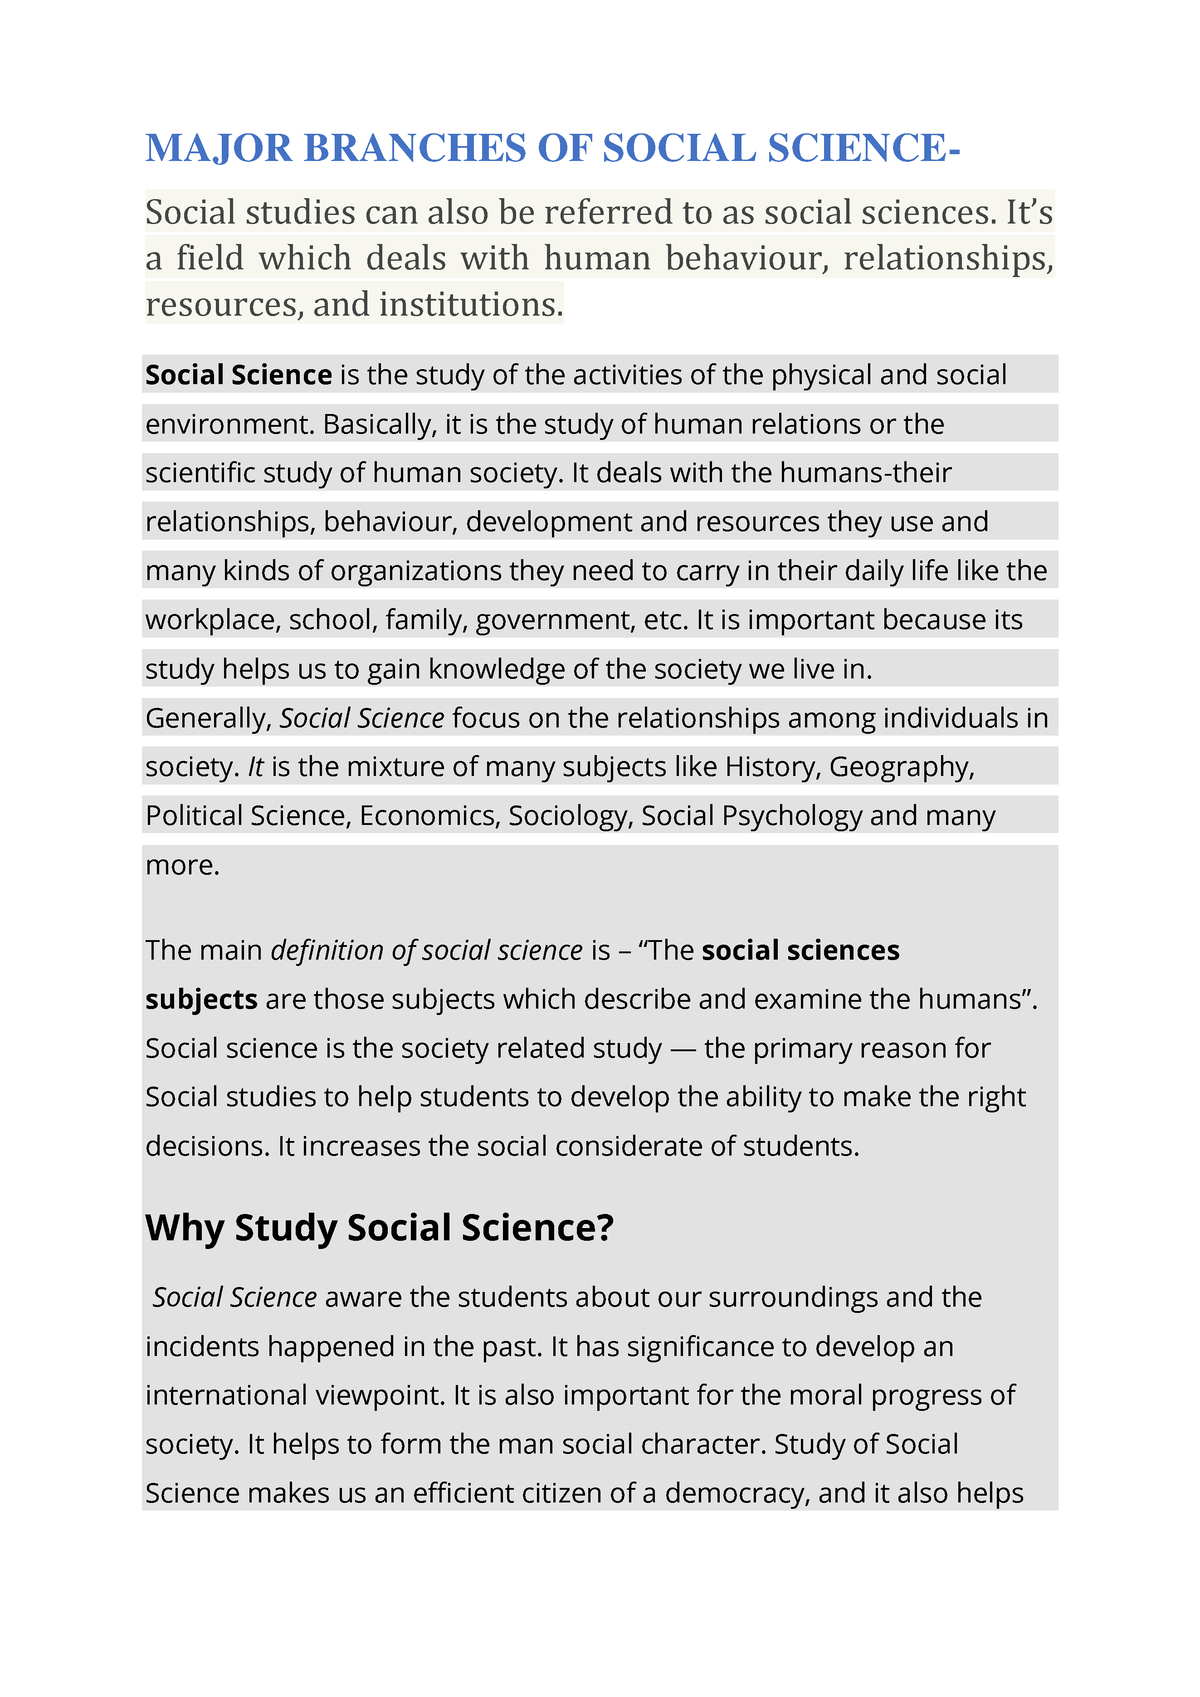 research study about social science